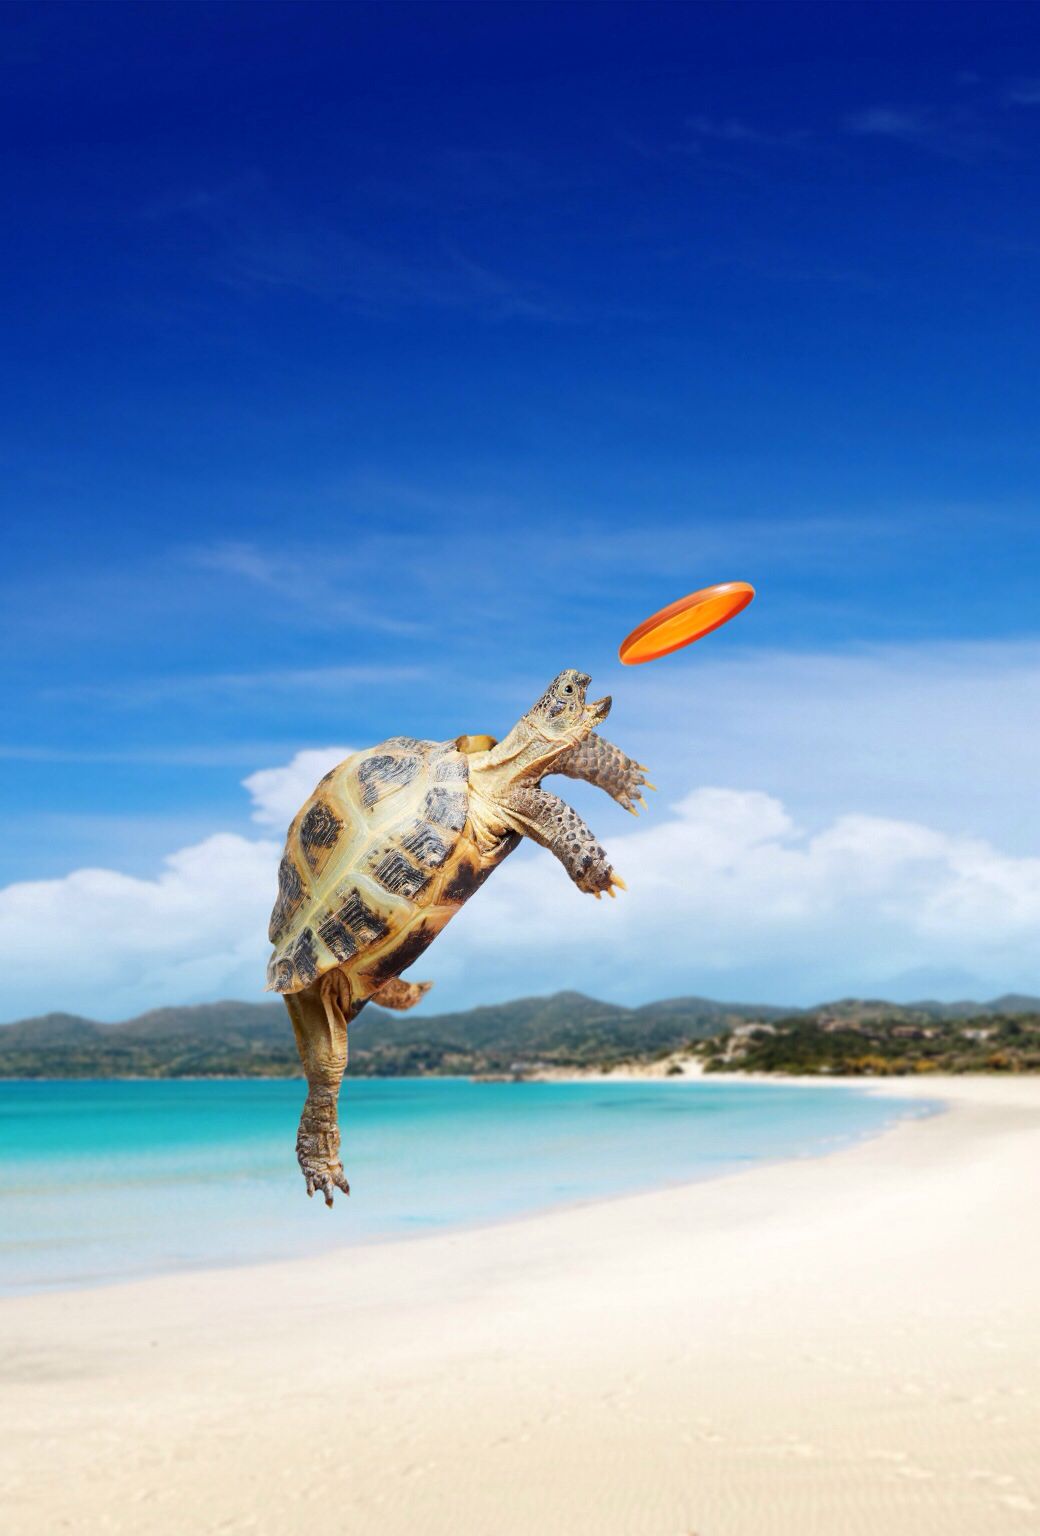 Turtle Catching A Frisbee On Beach Ios Wallpaper Accessories